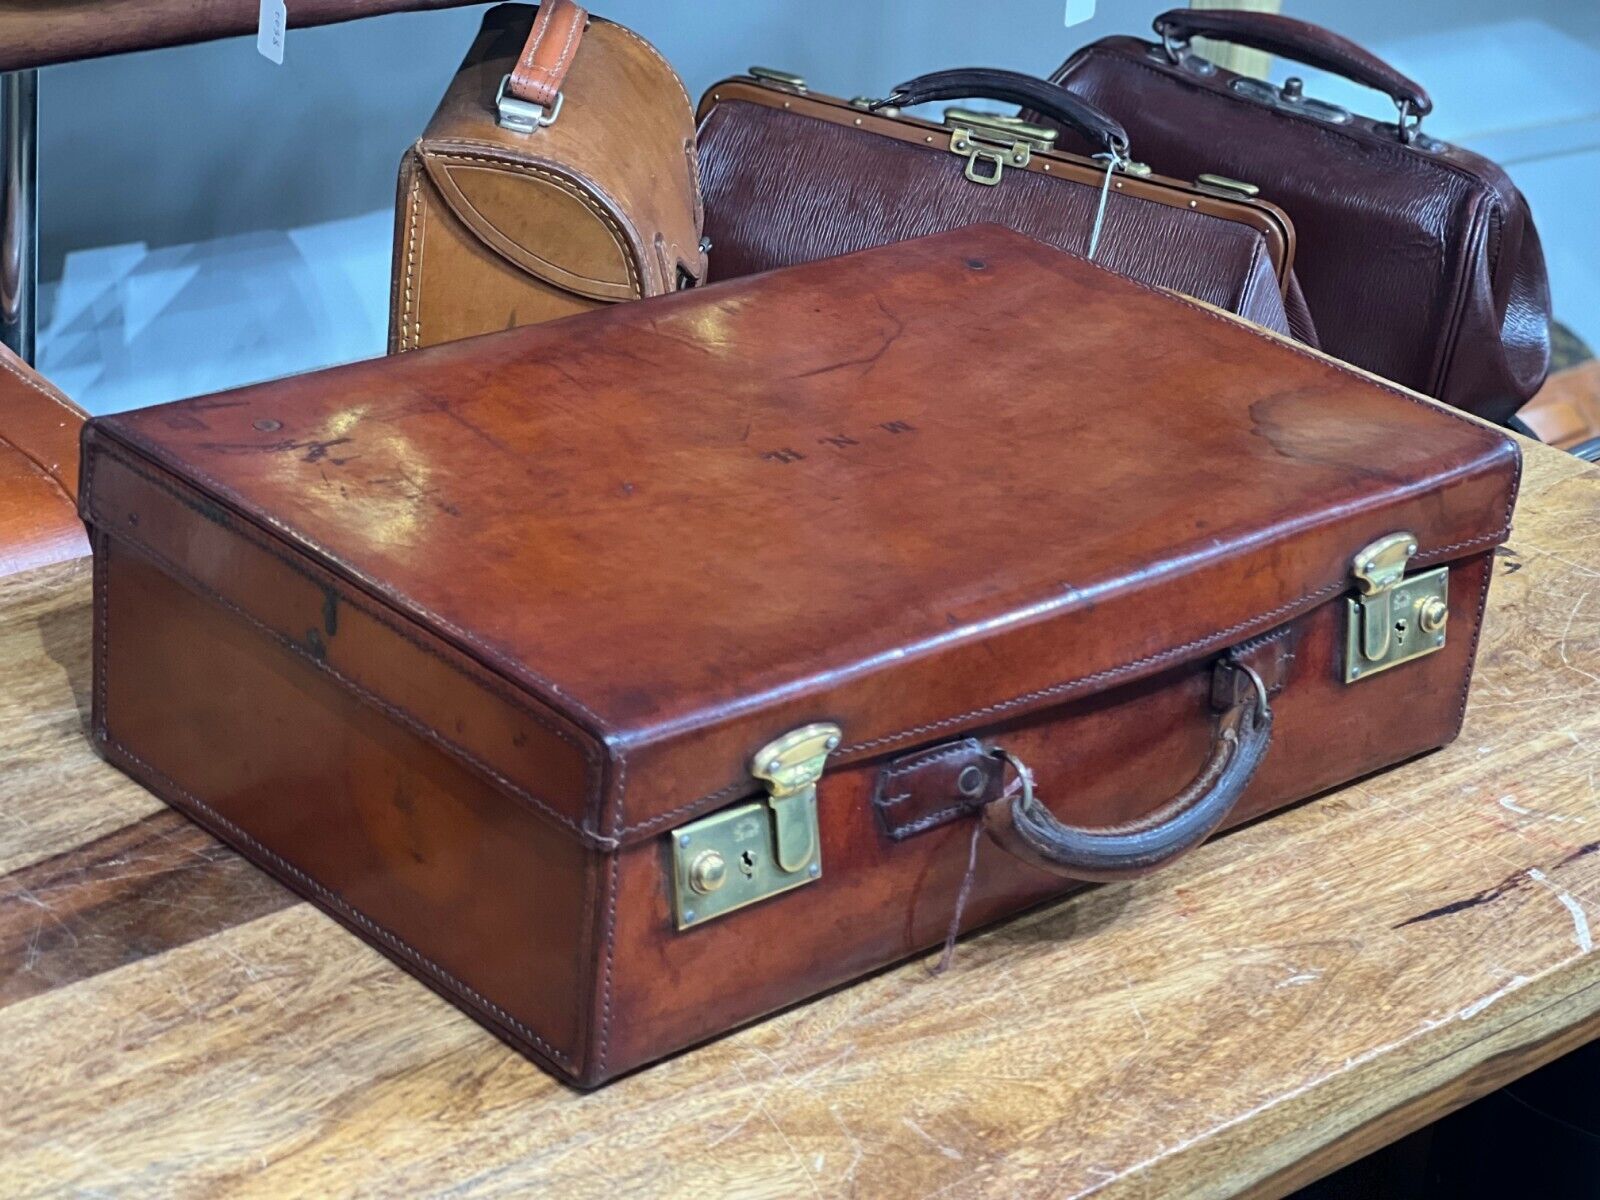 The classic beautiful leather suitcase made by Rawling Bros